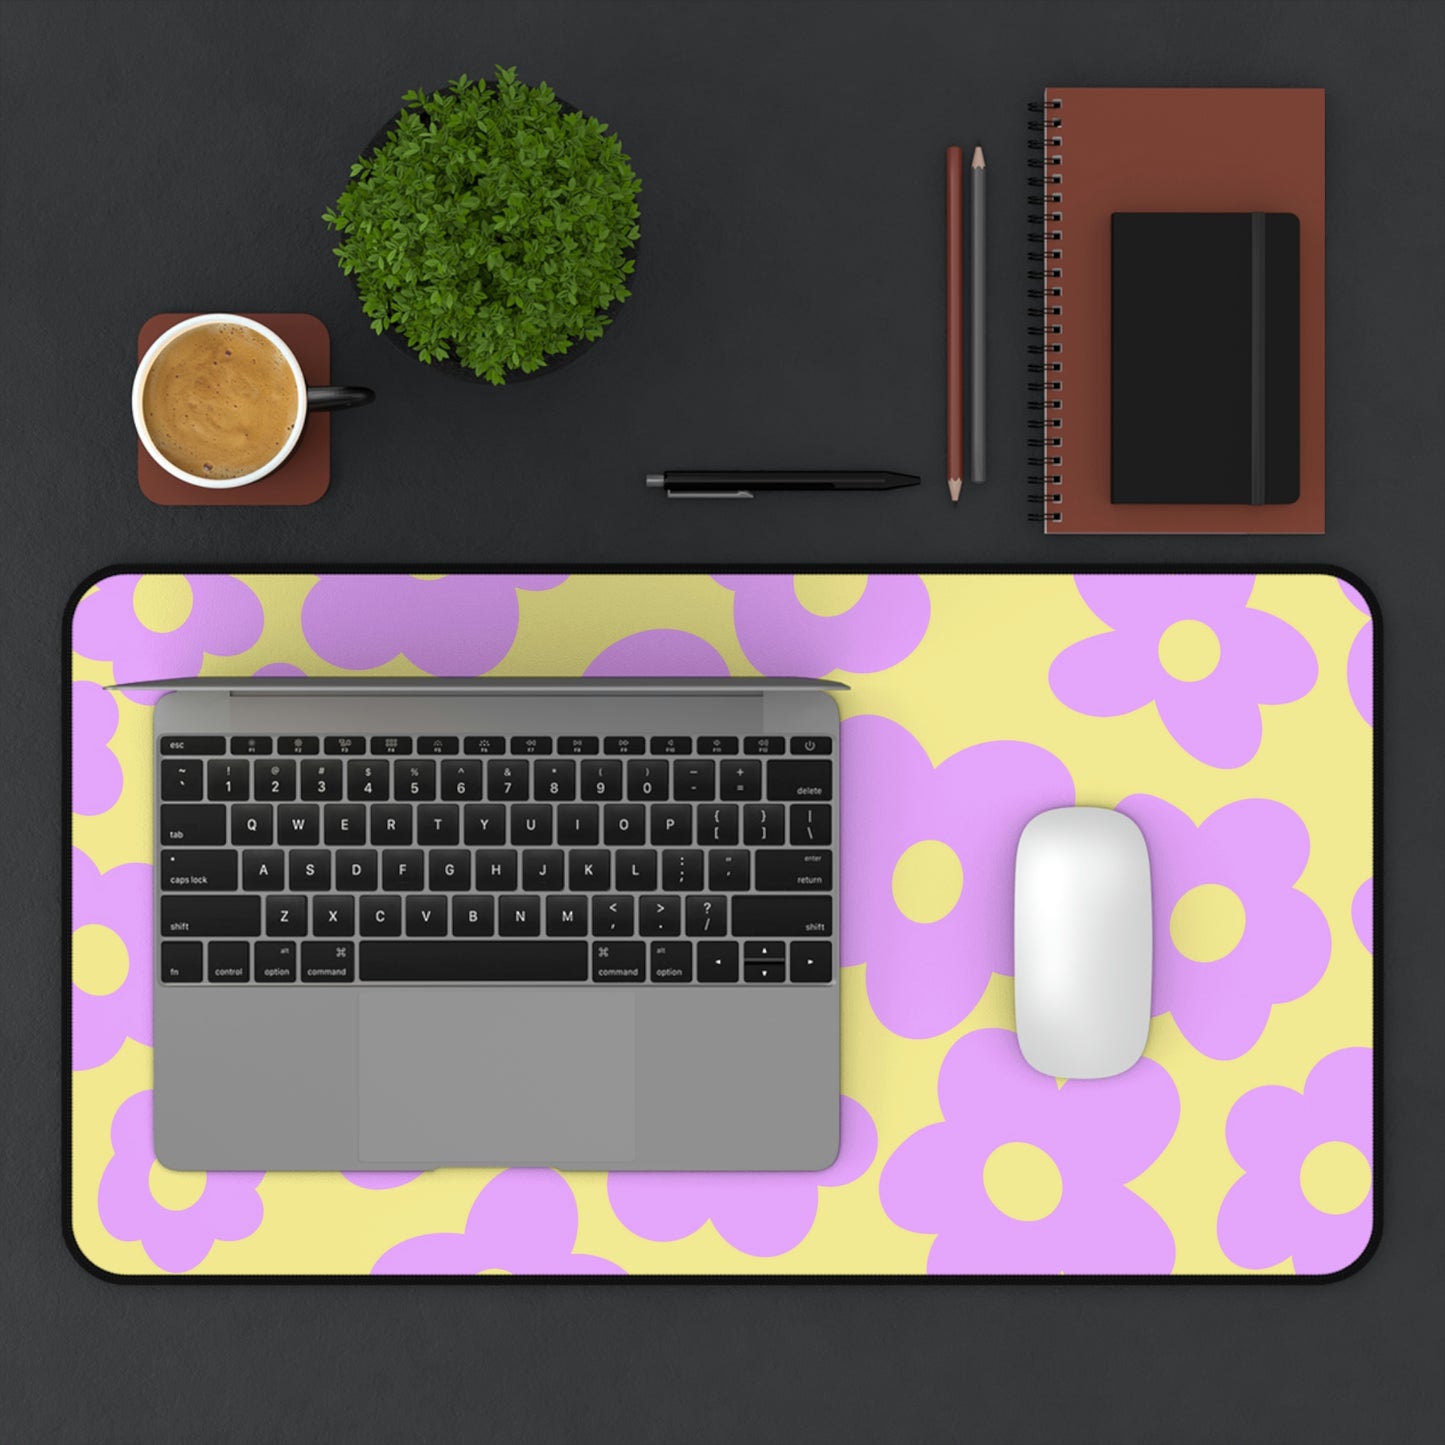 A 12" x 22" desk mat with purple flowers on a yellow background. A laptop and mouse sit on top of it.